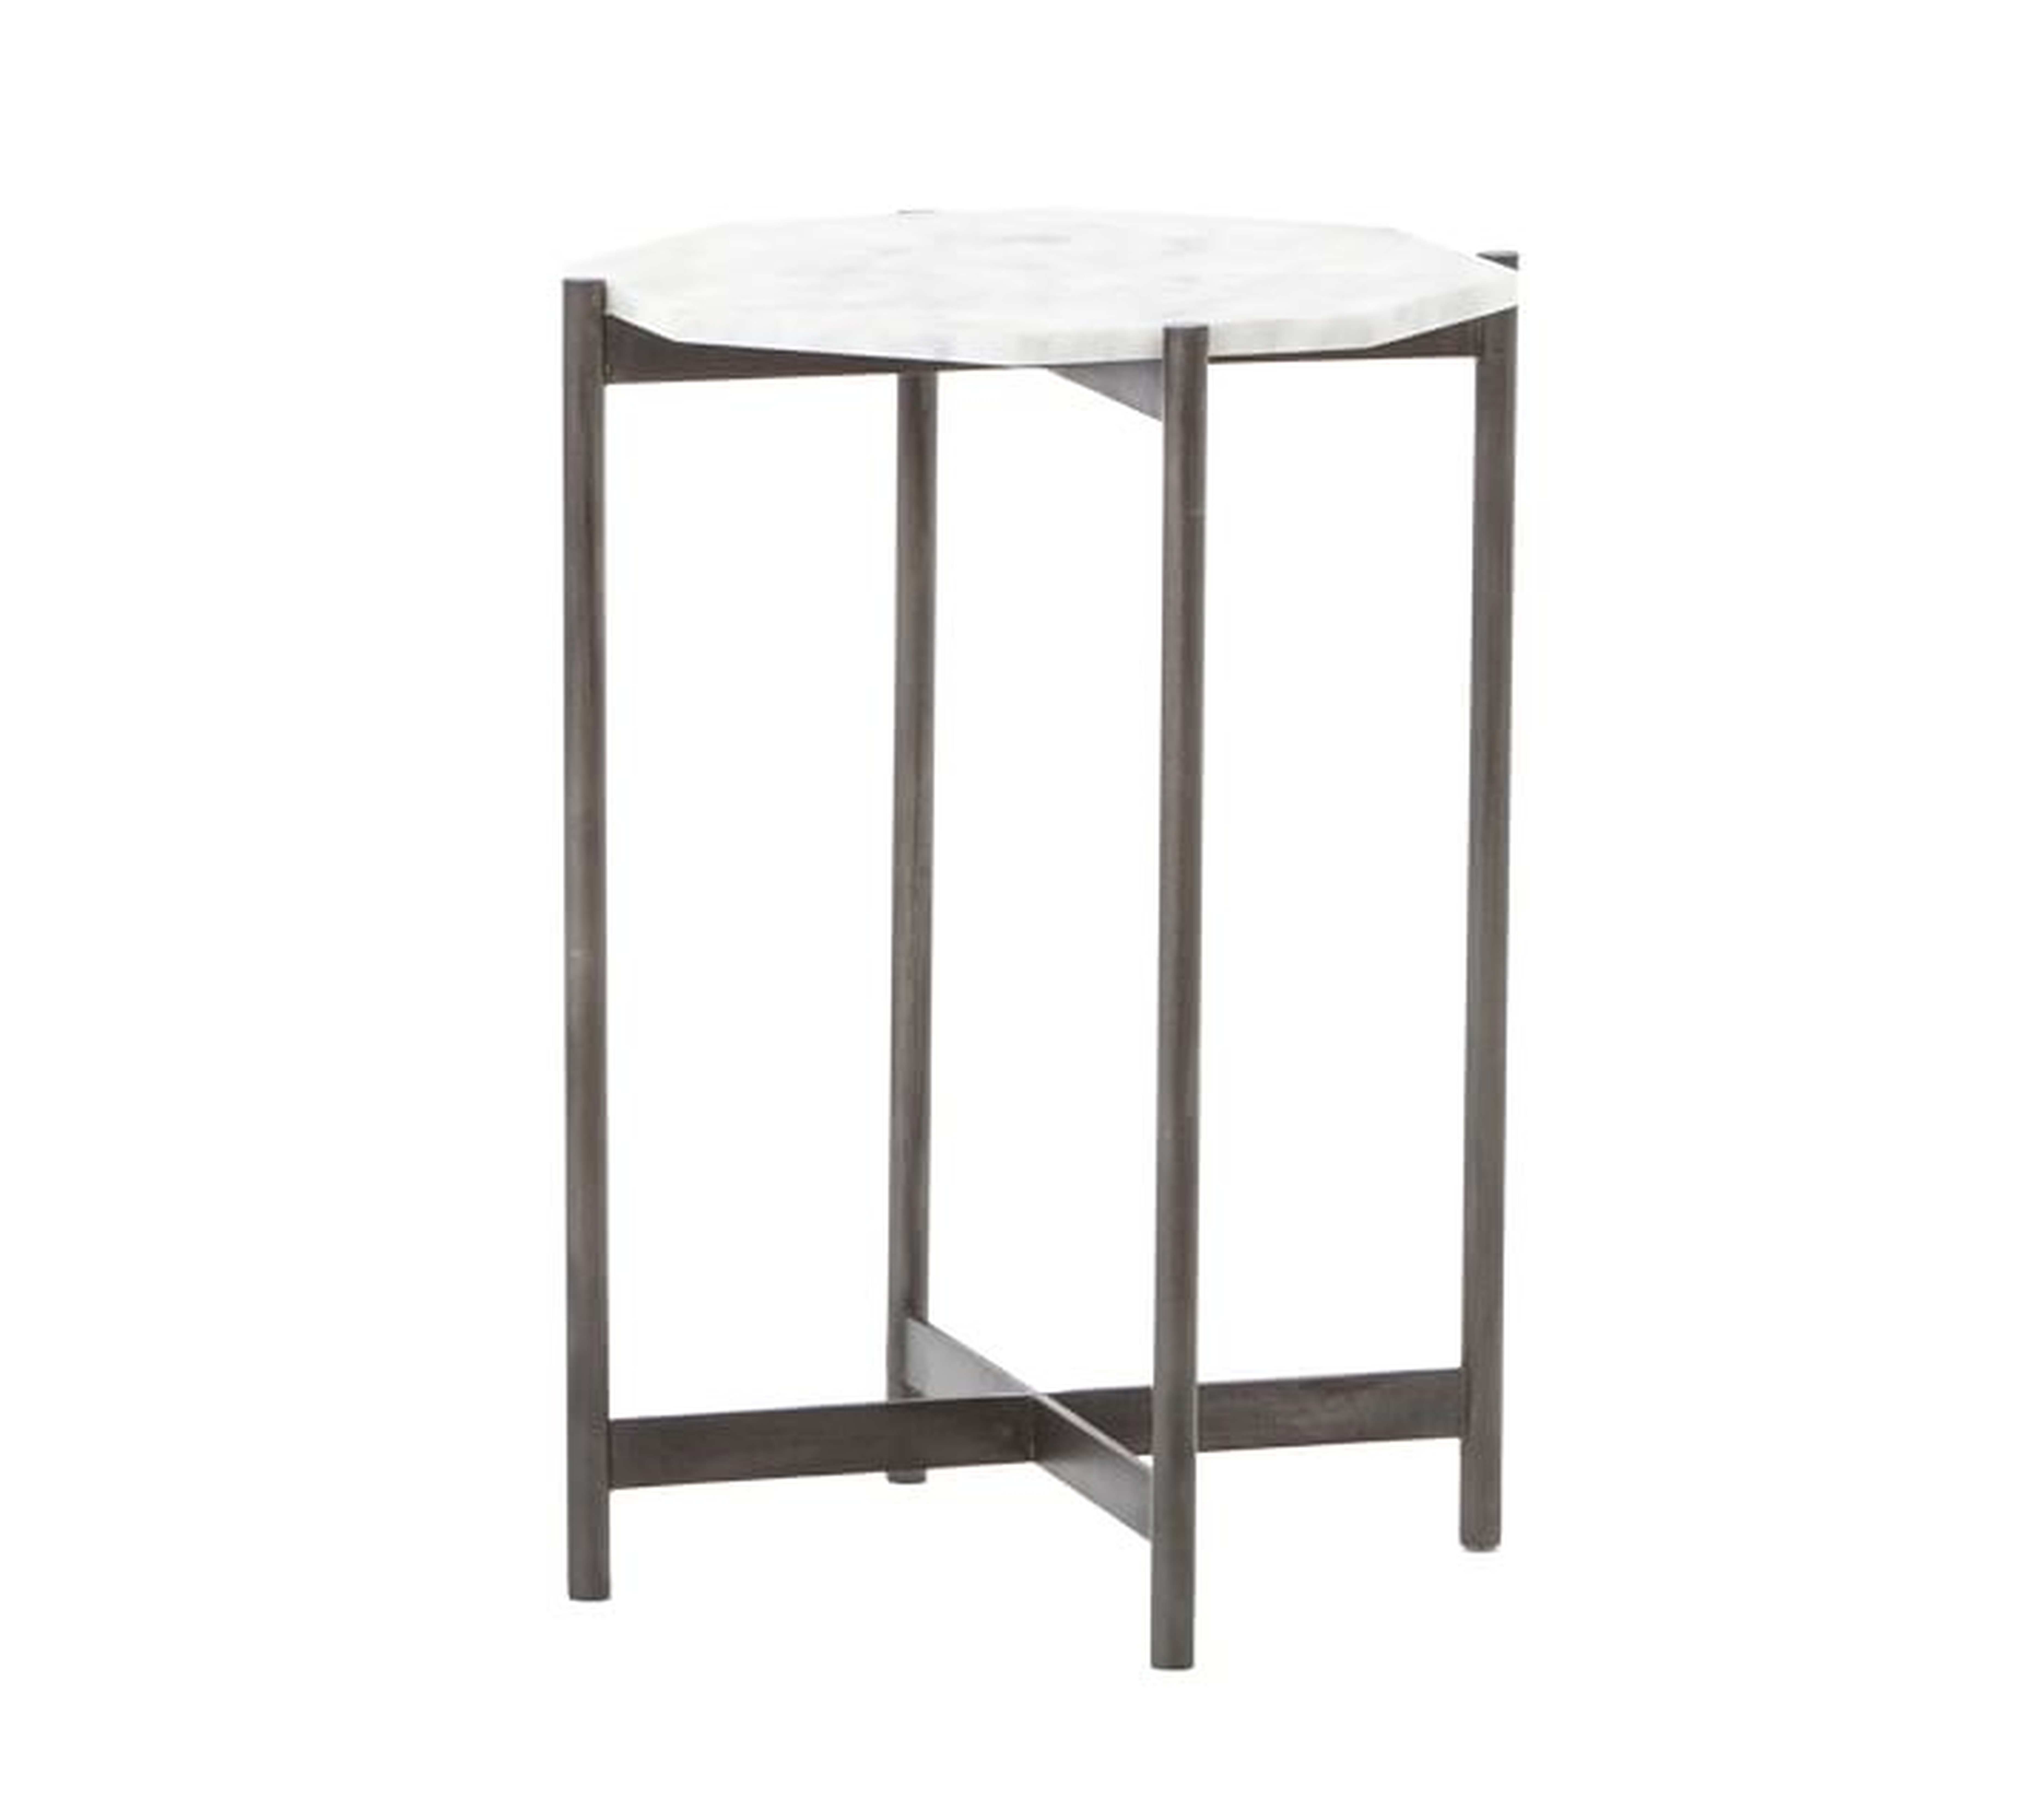 MONTAGUE SIDE TABLE - Pottery Barn